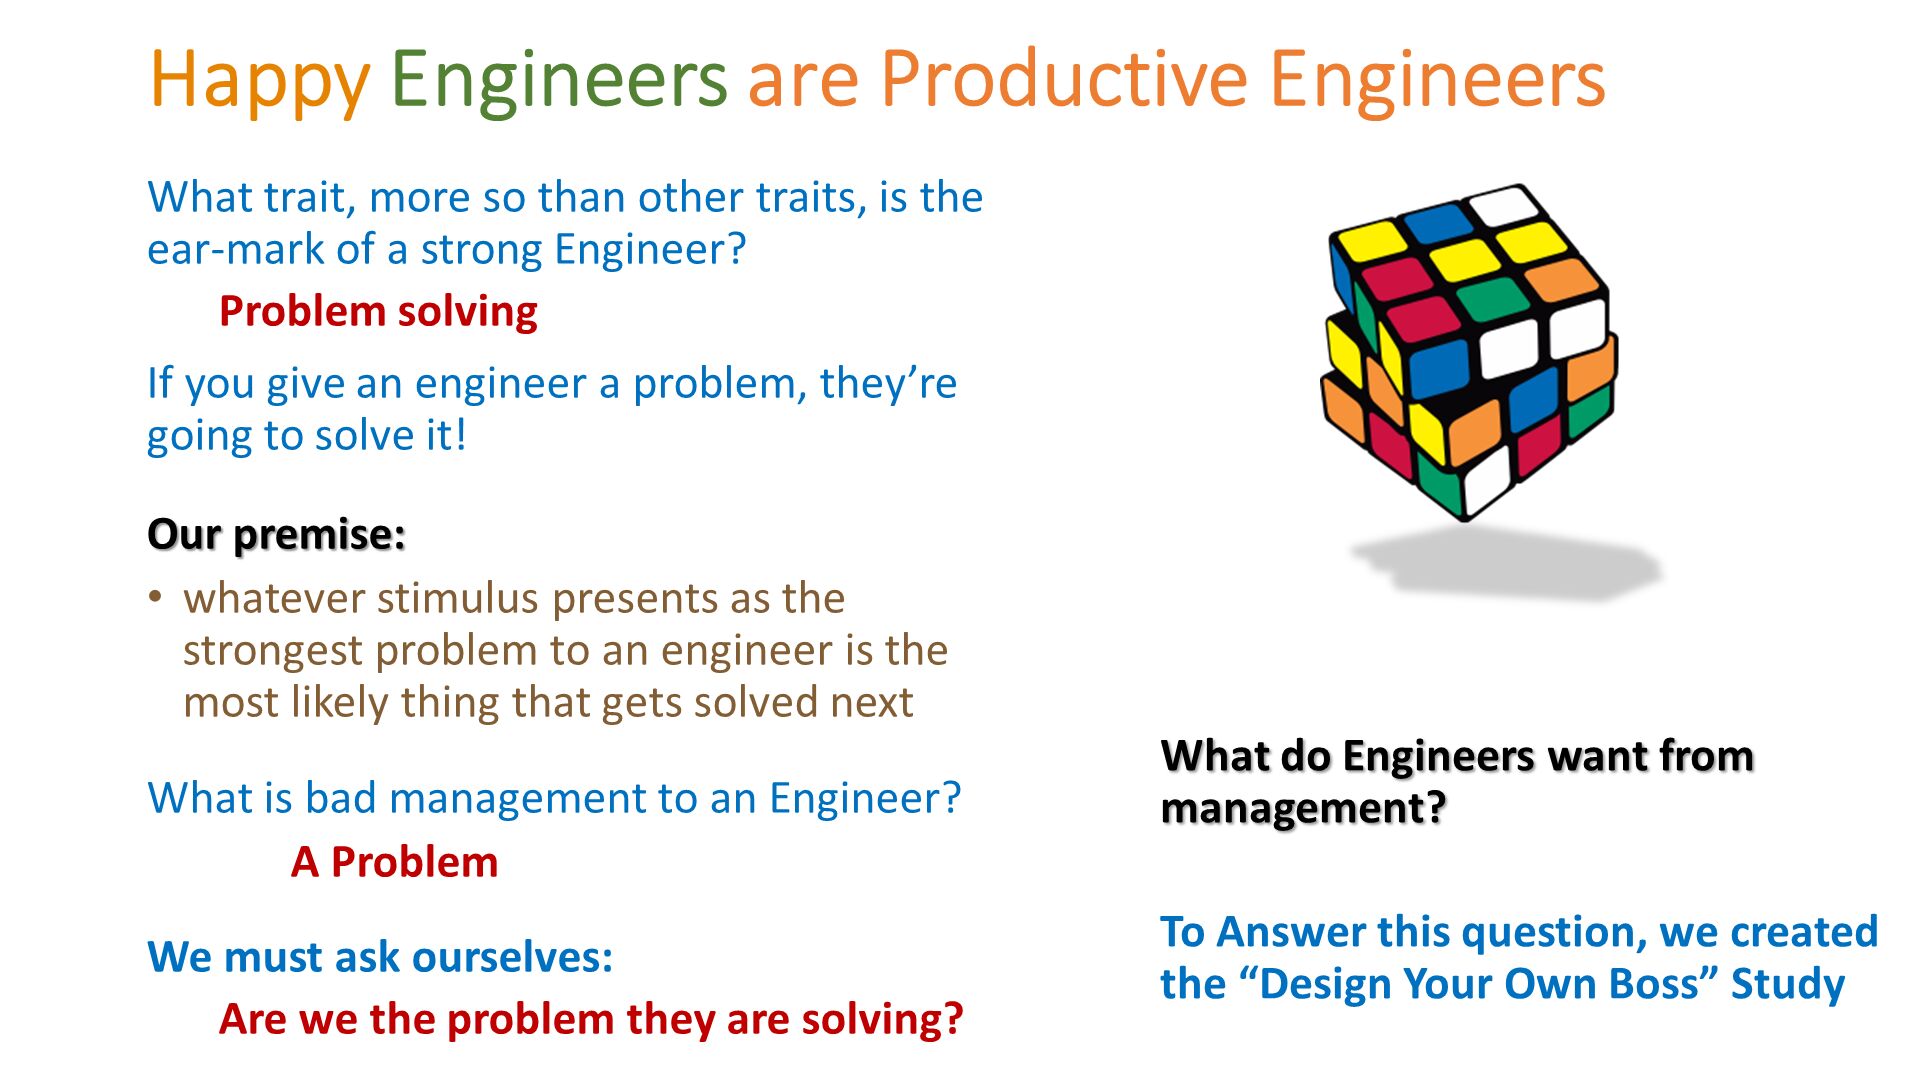 Happy Engineers are Productive Engineers. What trait, more so than other traits, is the ear-mark of a strong Engineer? 
Problem solving 
If you give an engineer a problem, they’re going to solve it!
Our premise: 
whatever stimulus presents as the strongest problem to an engineer is the most likely thing that gets solved next
What is bad management to an Engineer?  
	A Problem
We must ask ourselves: 
Are we the problem they are solving?. What do Engineers want from management?
To Answer this question, we created the “Design Your Own Boss” Study. 